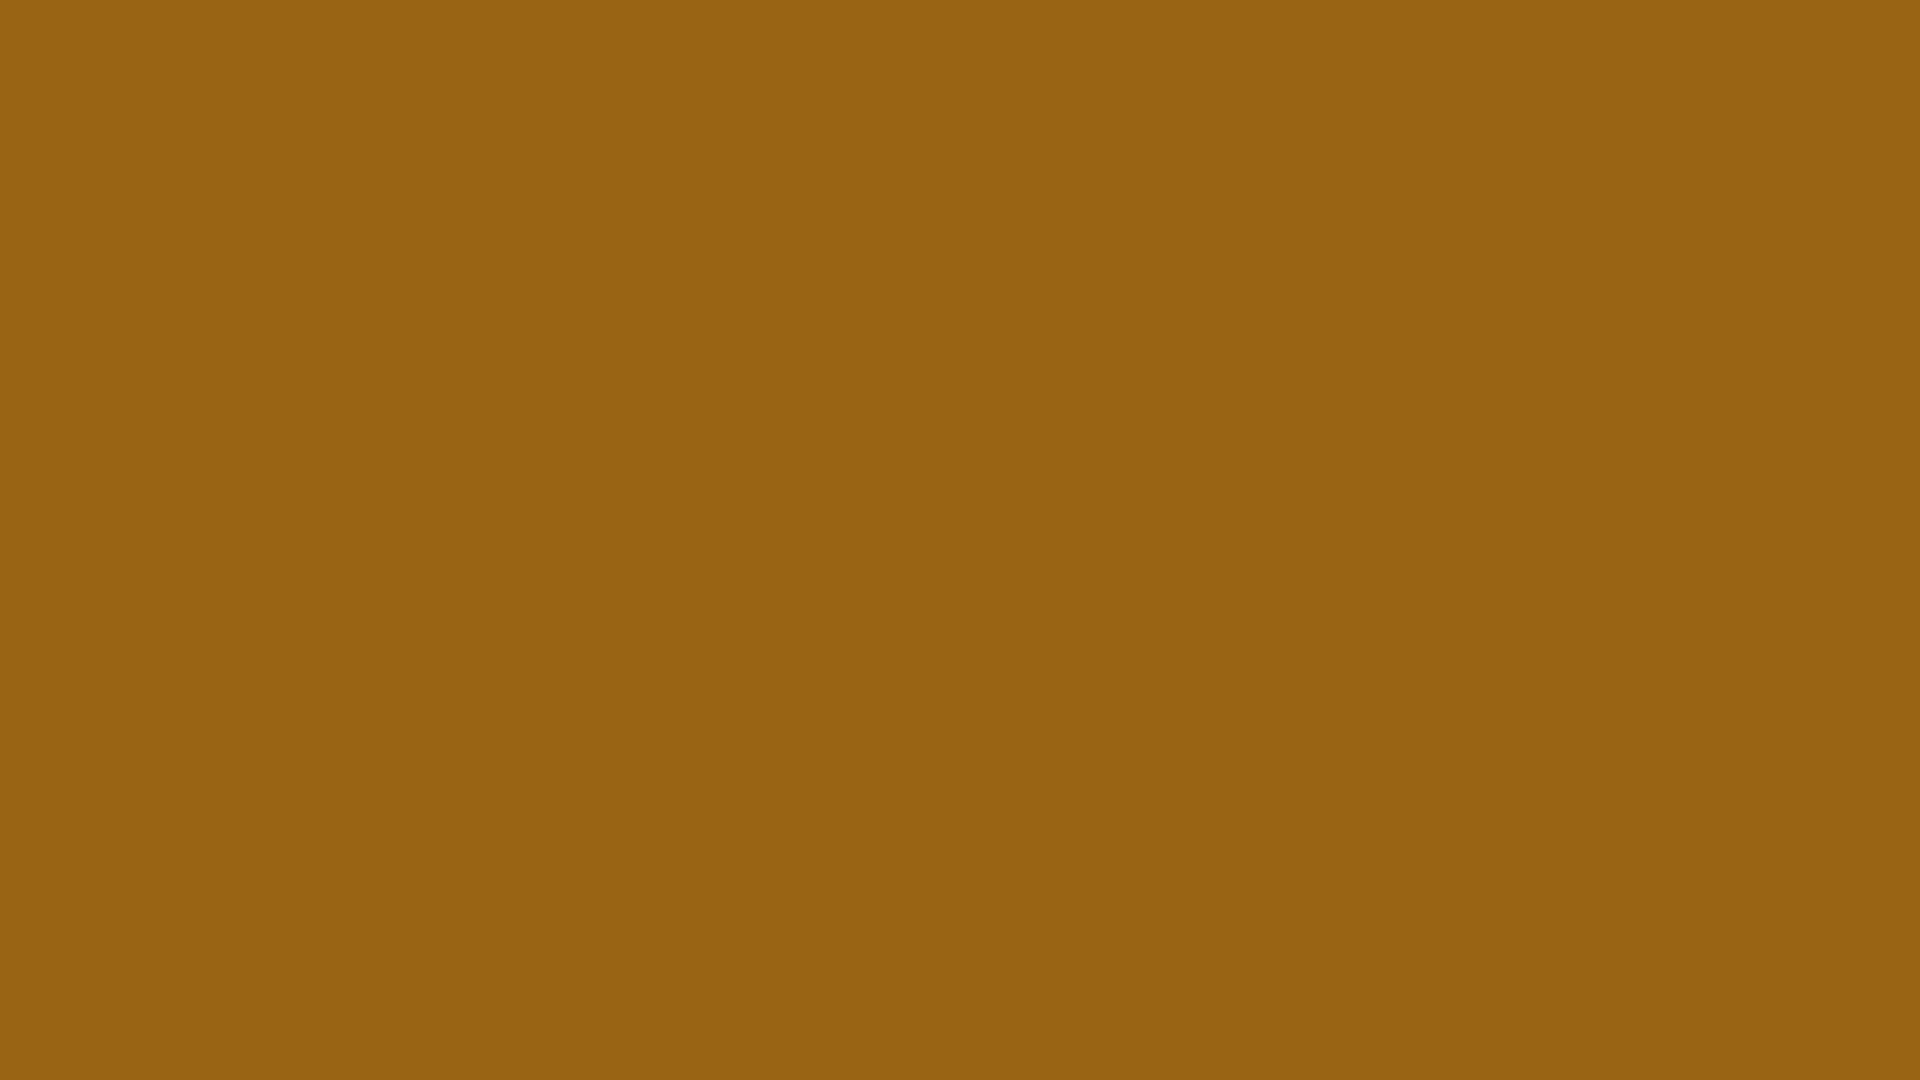 1920x1080 Golden Brown Solid Color Background